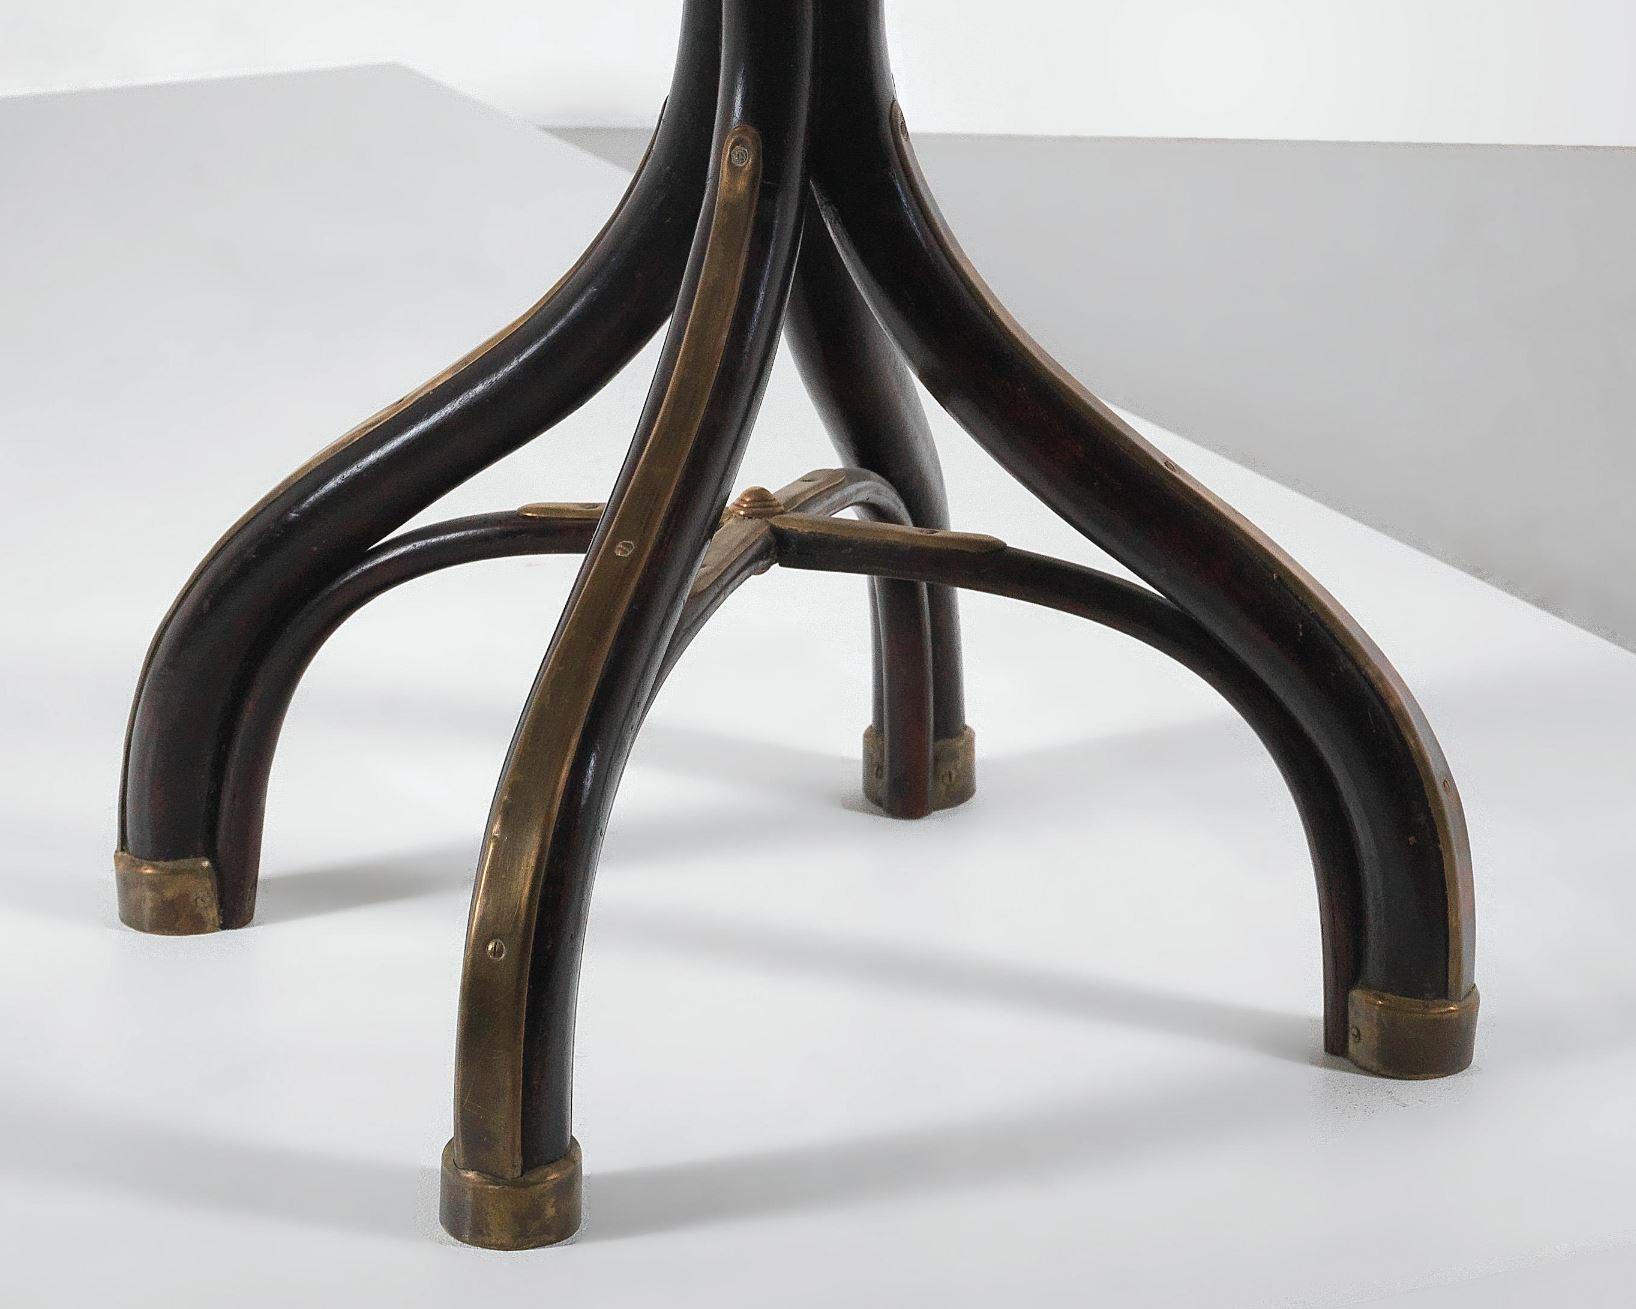 A very rare Thonet side-table from the famous Viennese Cafe Museum, designed by Adolf Loos in 1899, already featured in the Thonet Catalogue from 1888 on page 17 as Nr 8 and Nr 9 - see also an estimate from 2017 at Dorotheum auction house, Lit.: